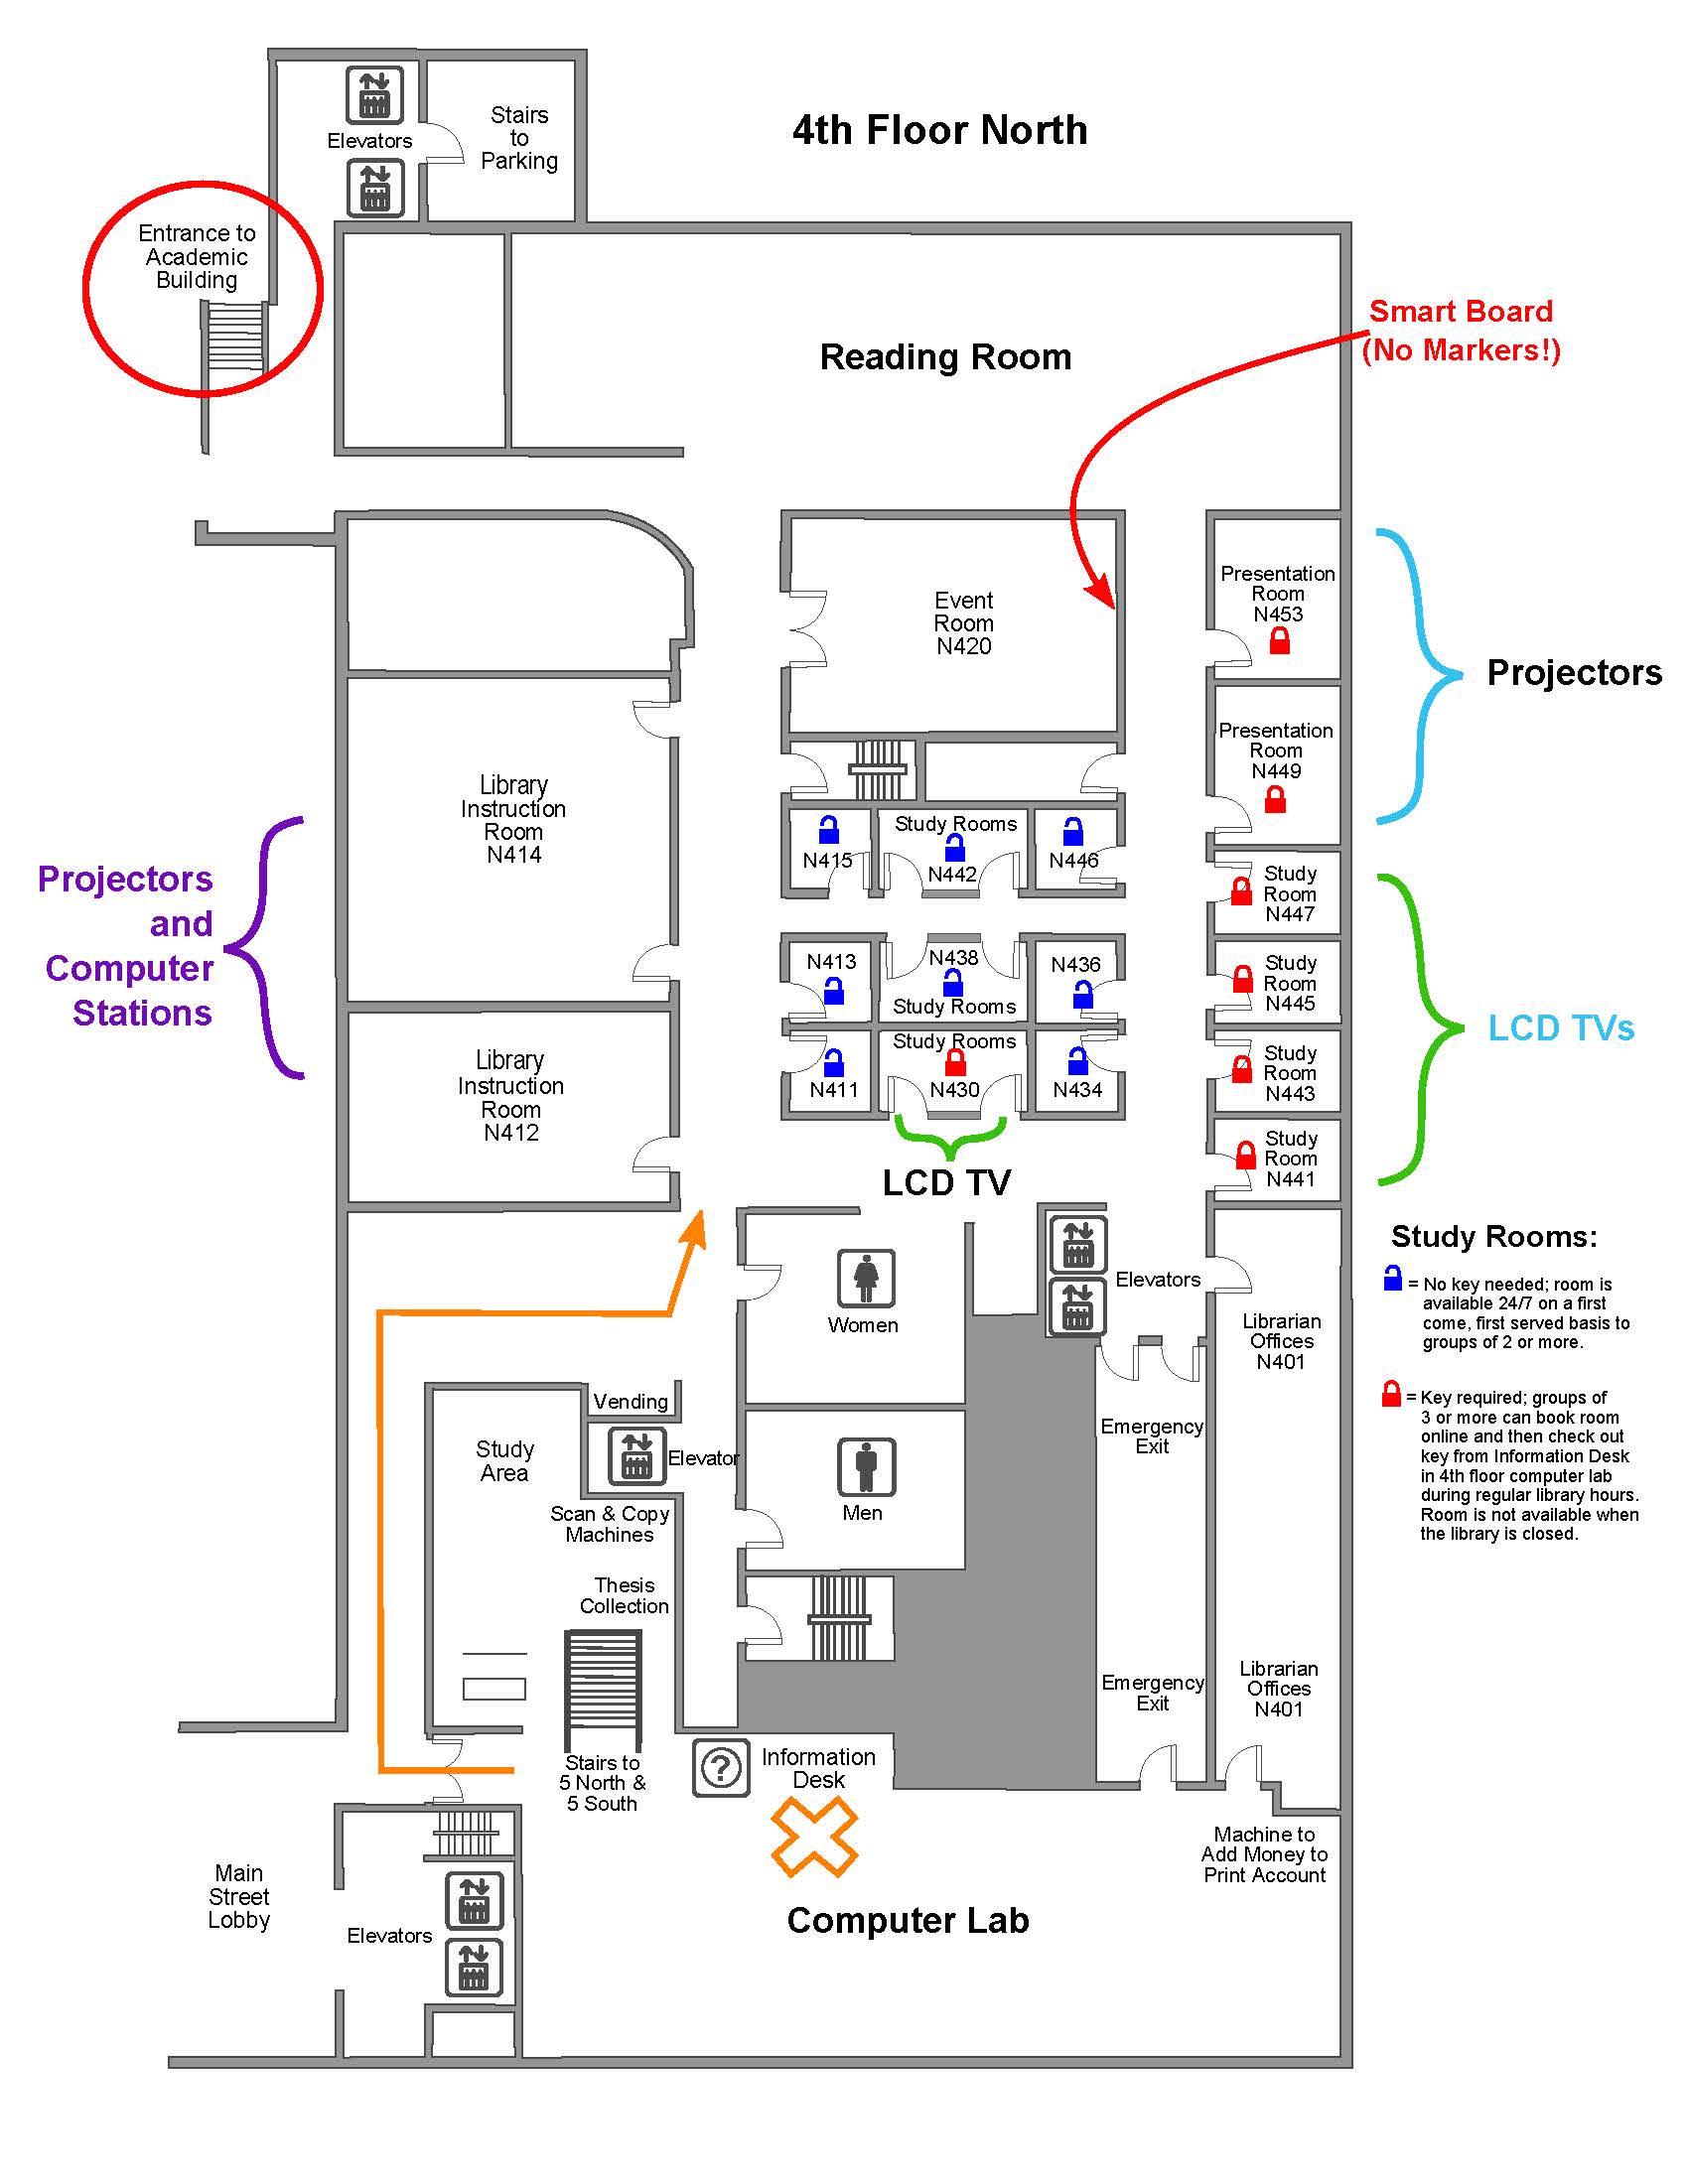 Map of 4th Floor North. Eight study rooms are available any time the One Main Building is open to groups of 2 or more; those rooms are N411, N413, N415, N434, N436, N438, N442, and N446. Seven rooms have technology equipment and can only be reserved and checked out by groups of 3 or more during library hours; check the key out from the Information Desk in the 4th Floor Computer Lab.  Those rooms are N430, N441, N443, N445, N447, N449, and N453.  Stop by the Information Desk in the 4th Floor Computer lab for assistance.